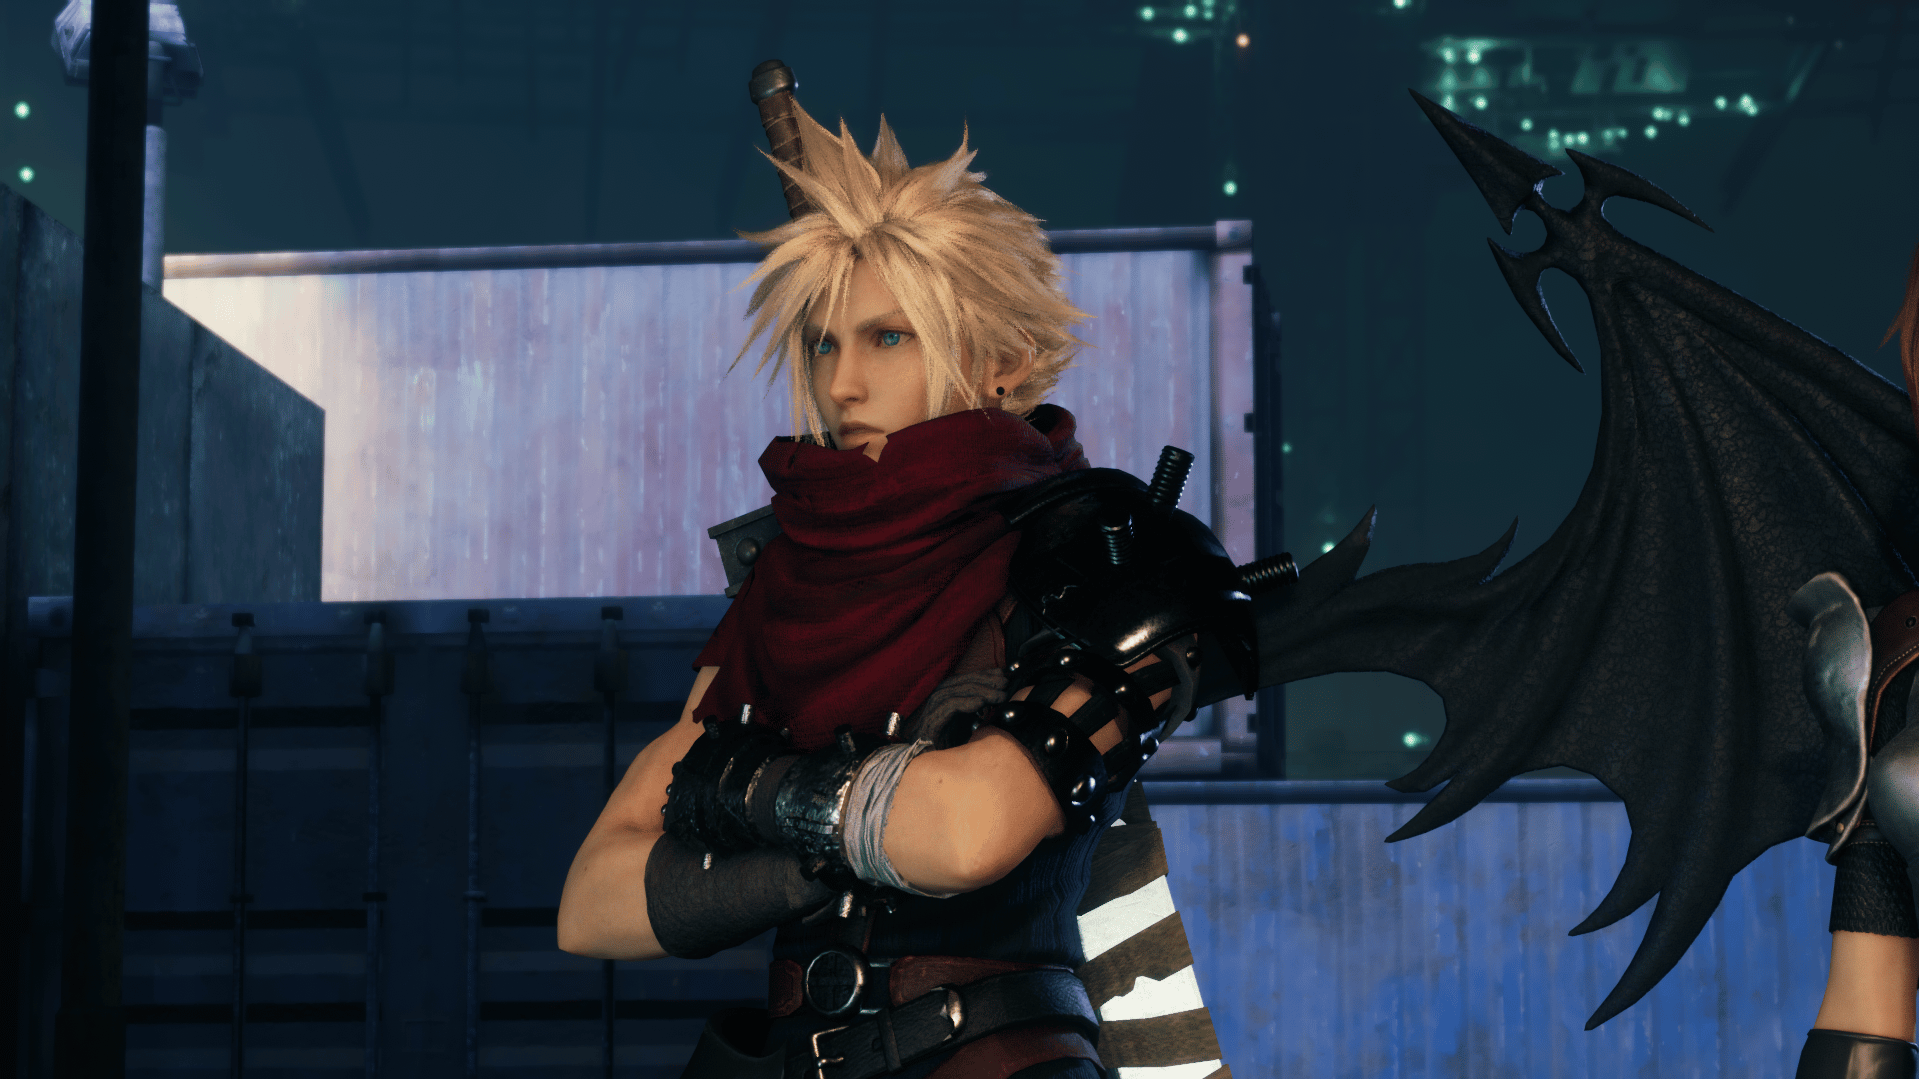 A Kingdom Hearts style Cloud FFVII Remake mod is an easy download